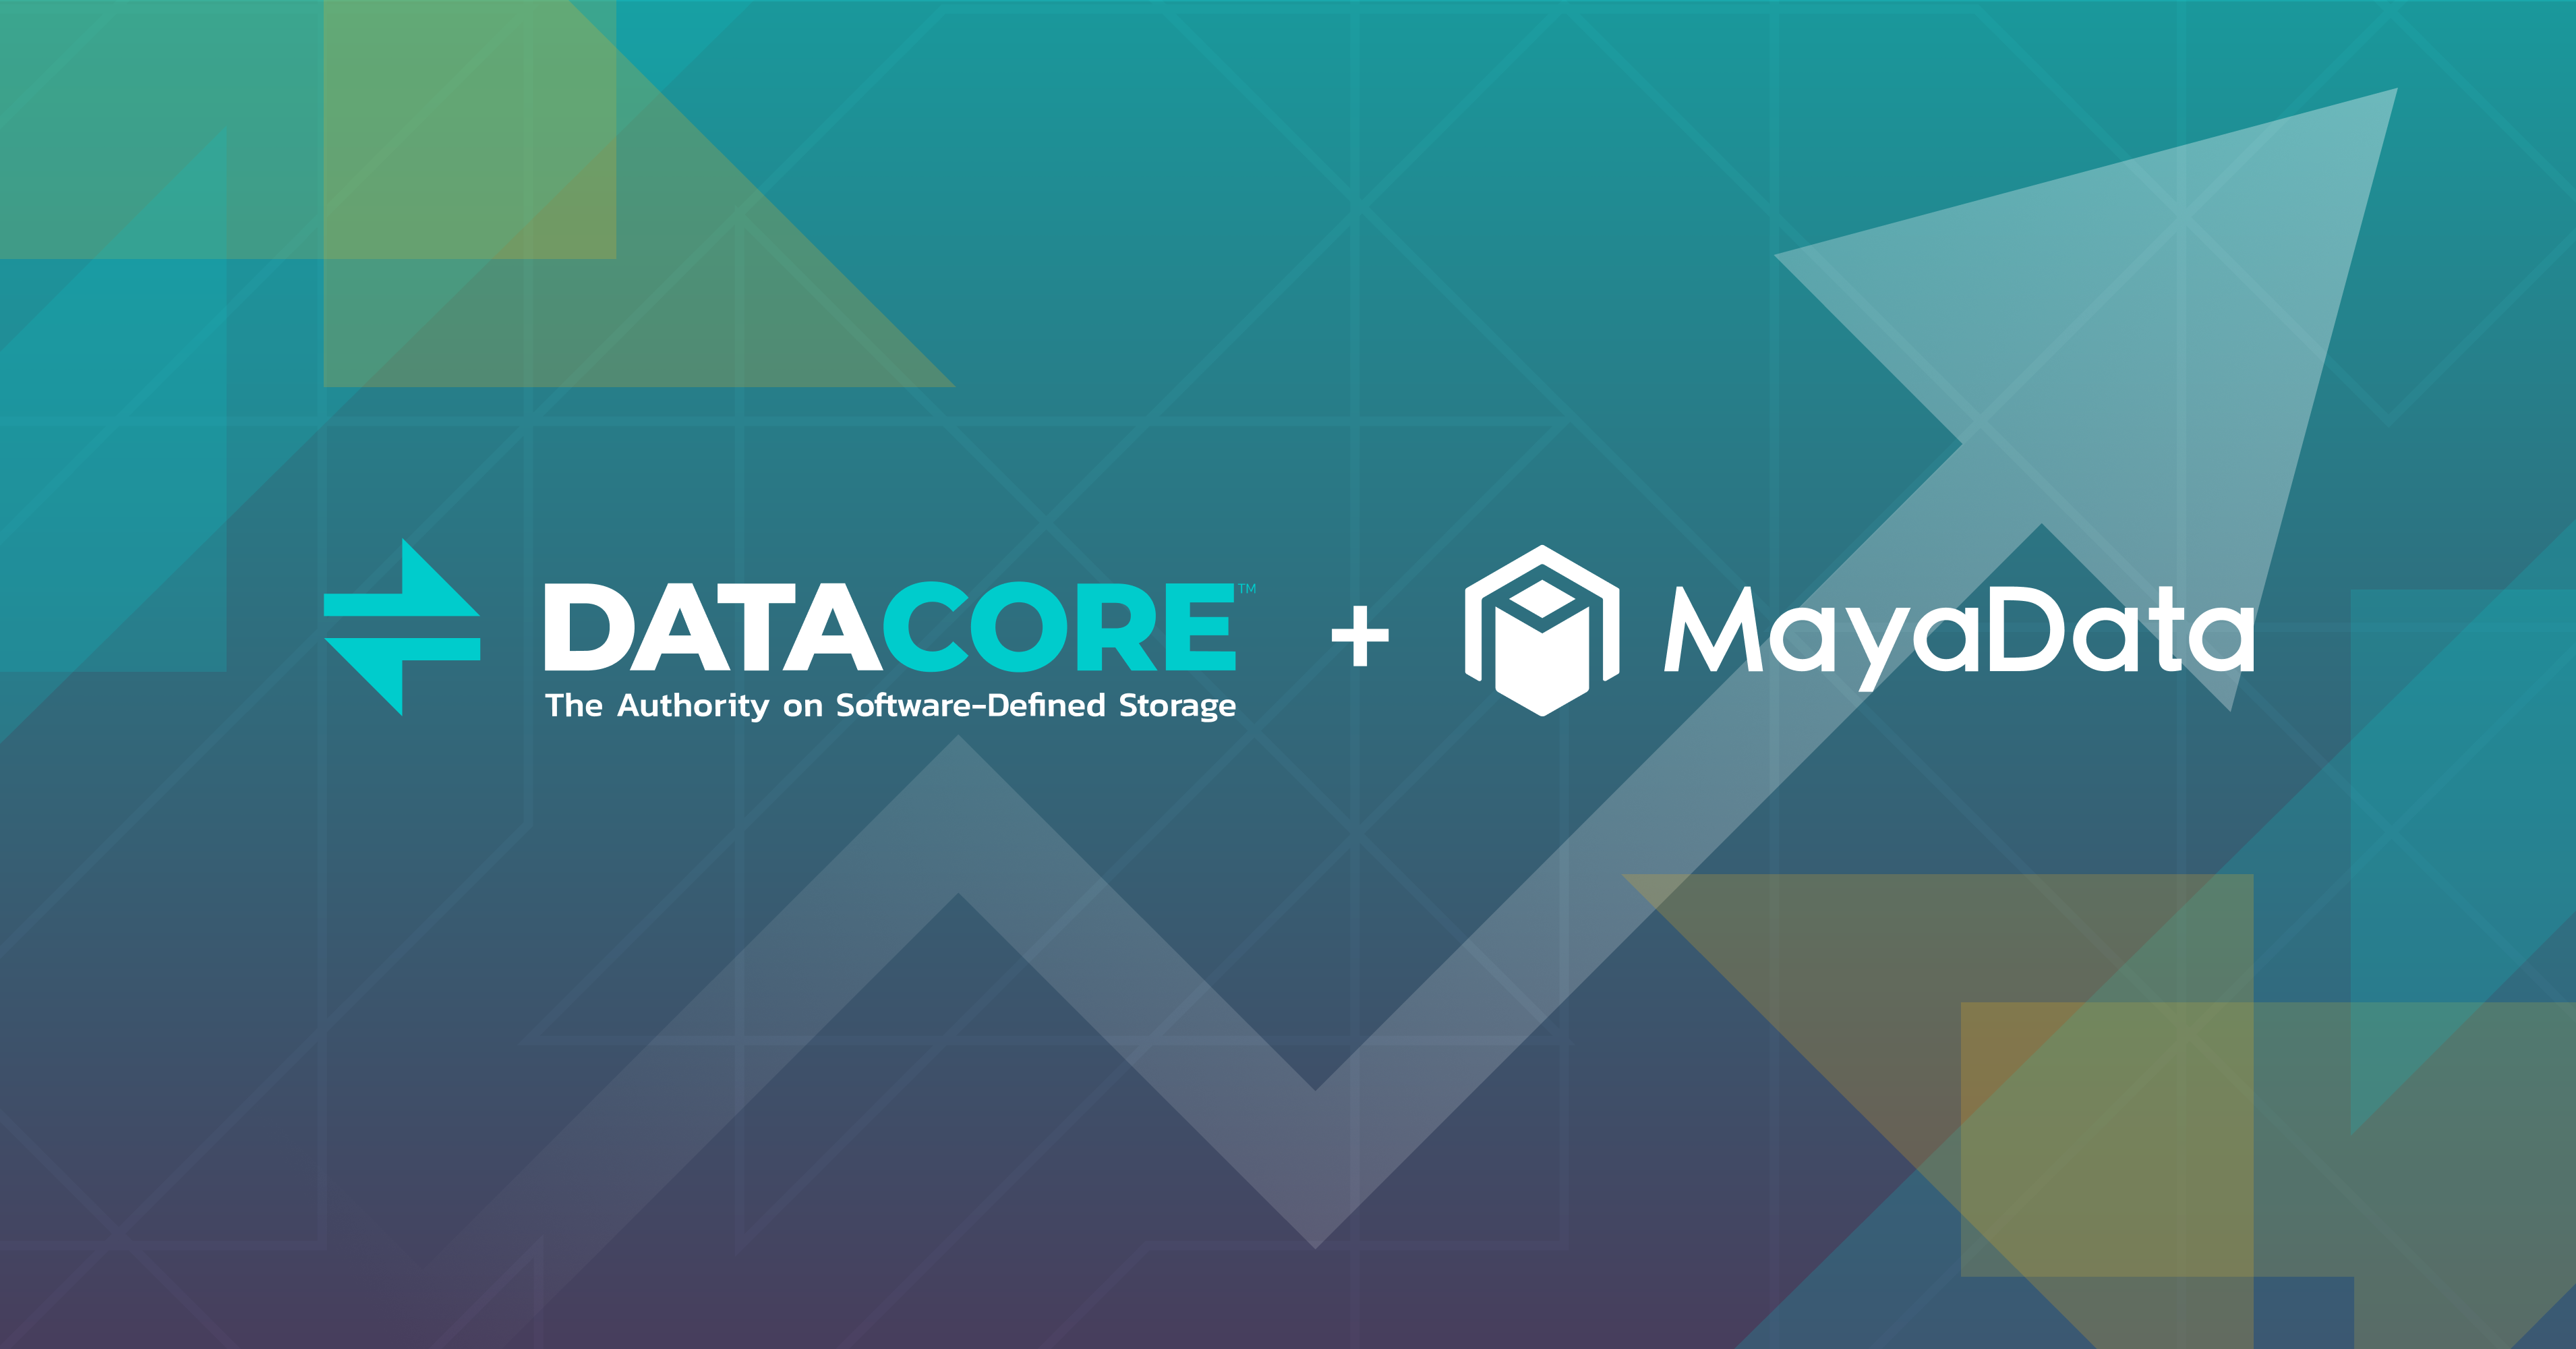 Game changer in Container and Storage paradigm- MayaData is being acquired by DataCore